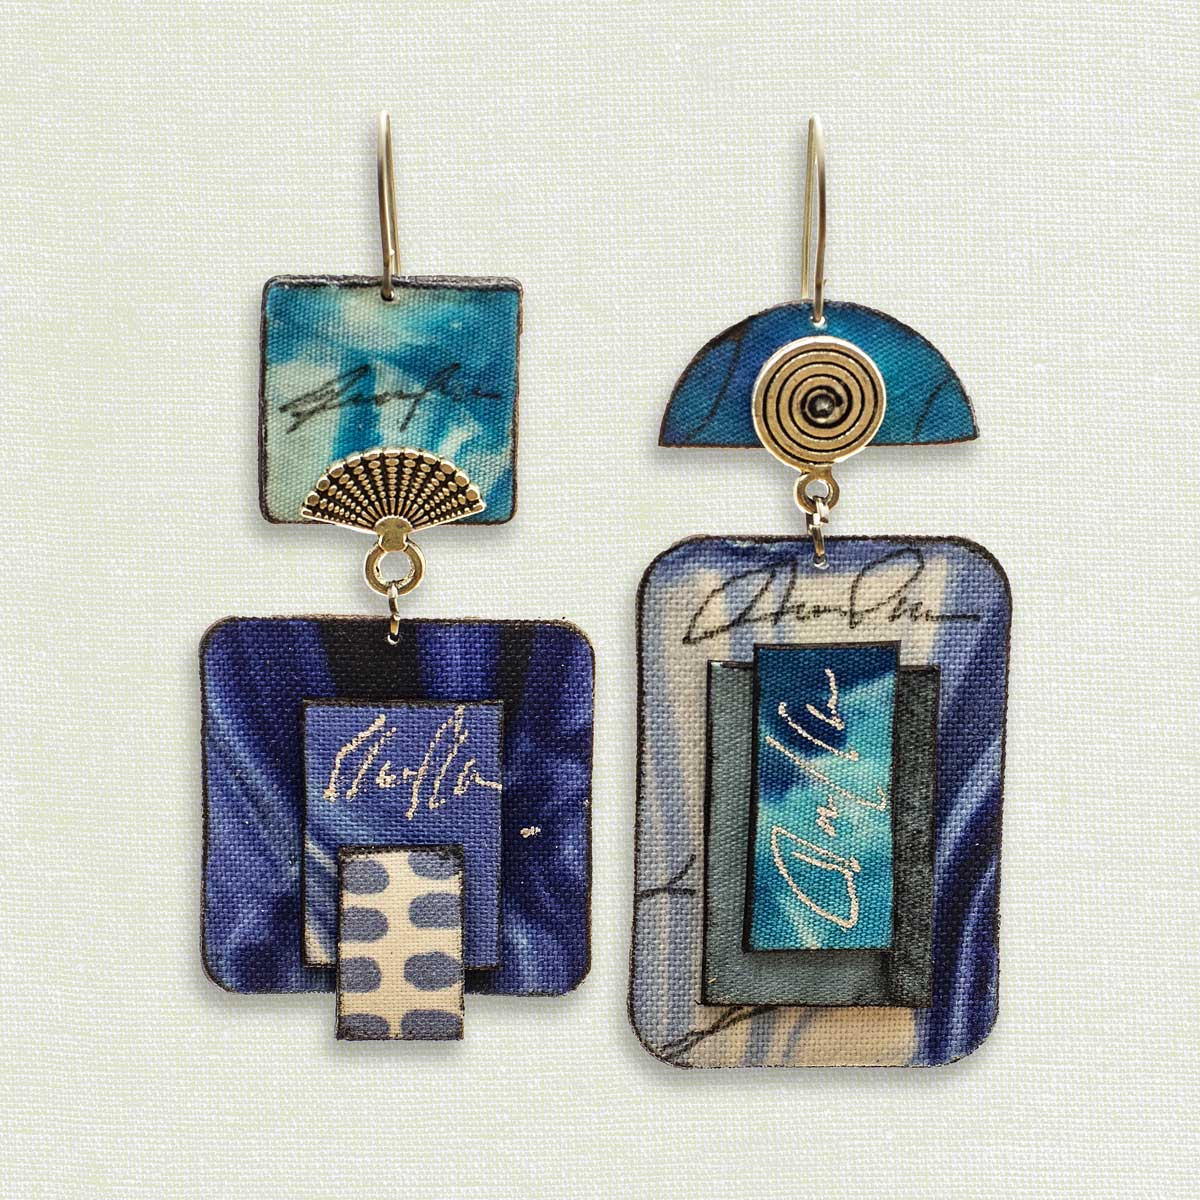 Asymmetric 2 tiered earrings hand painted by artist Suzanne Bellows for SuzanneBellowsJewelry.com. This pair is part of the Water Collection and features blues.